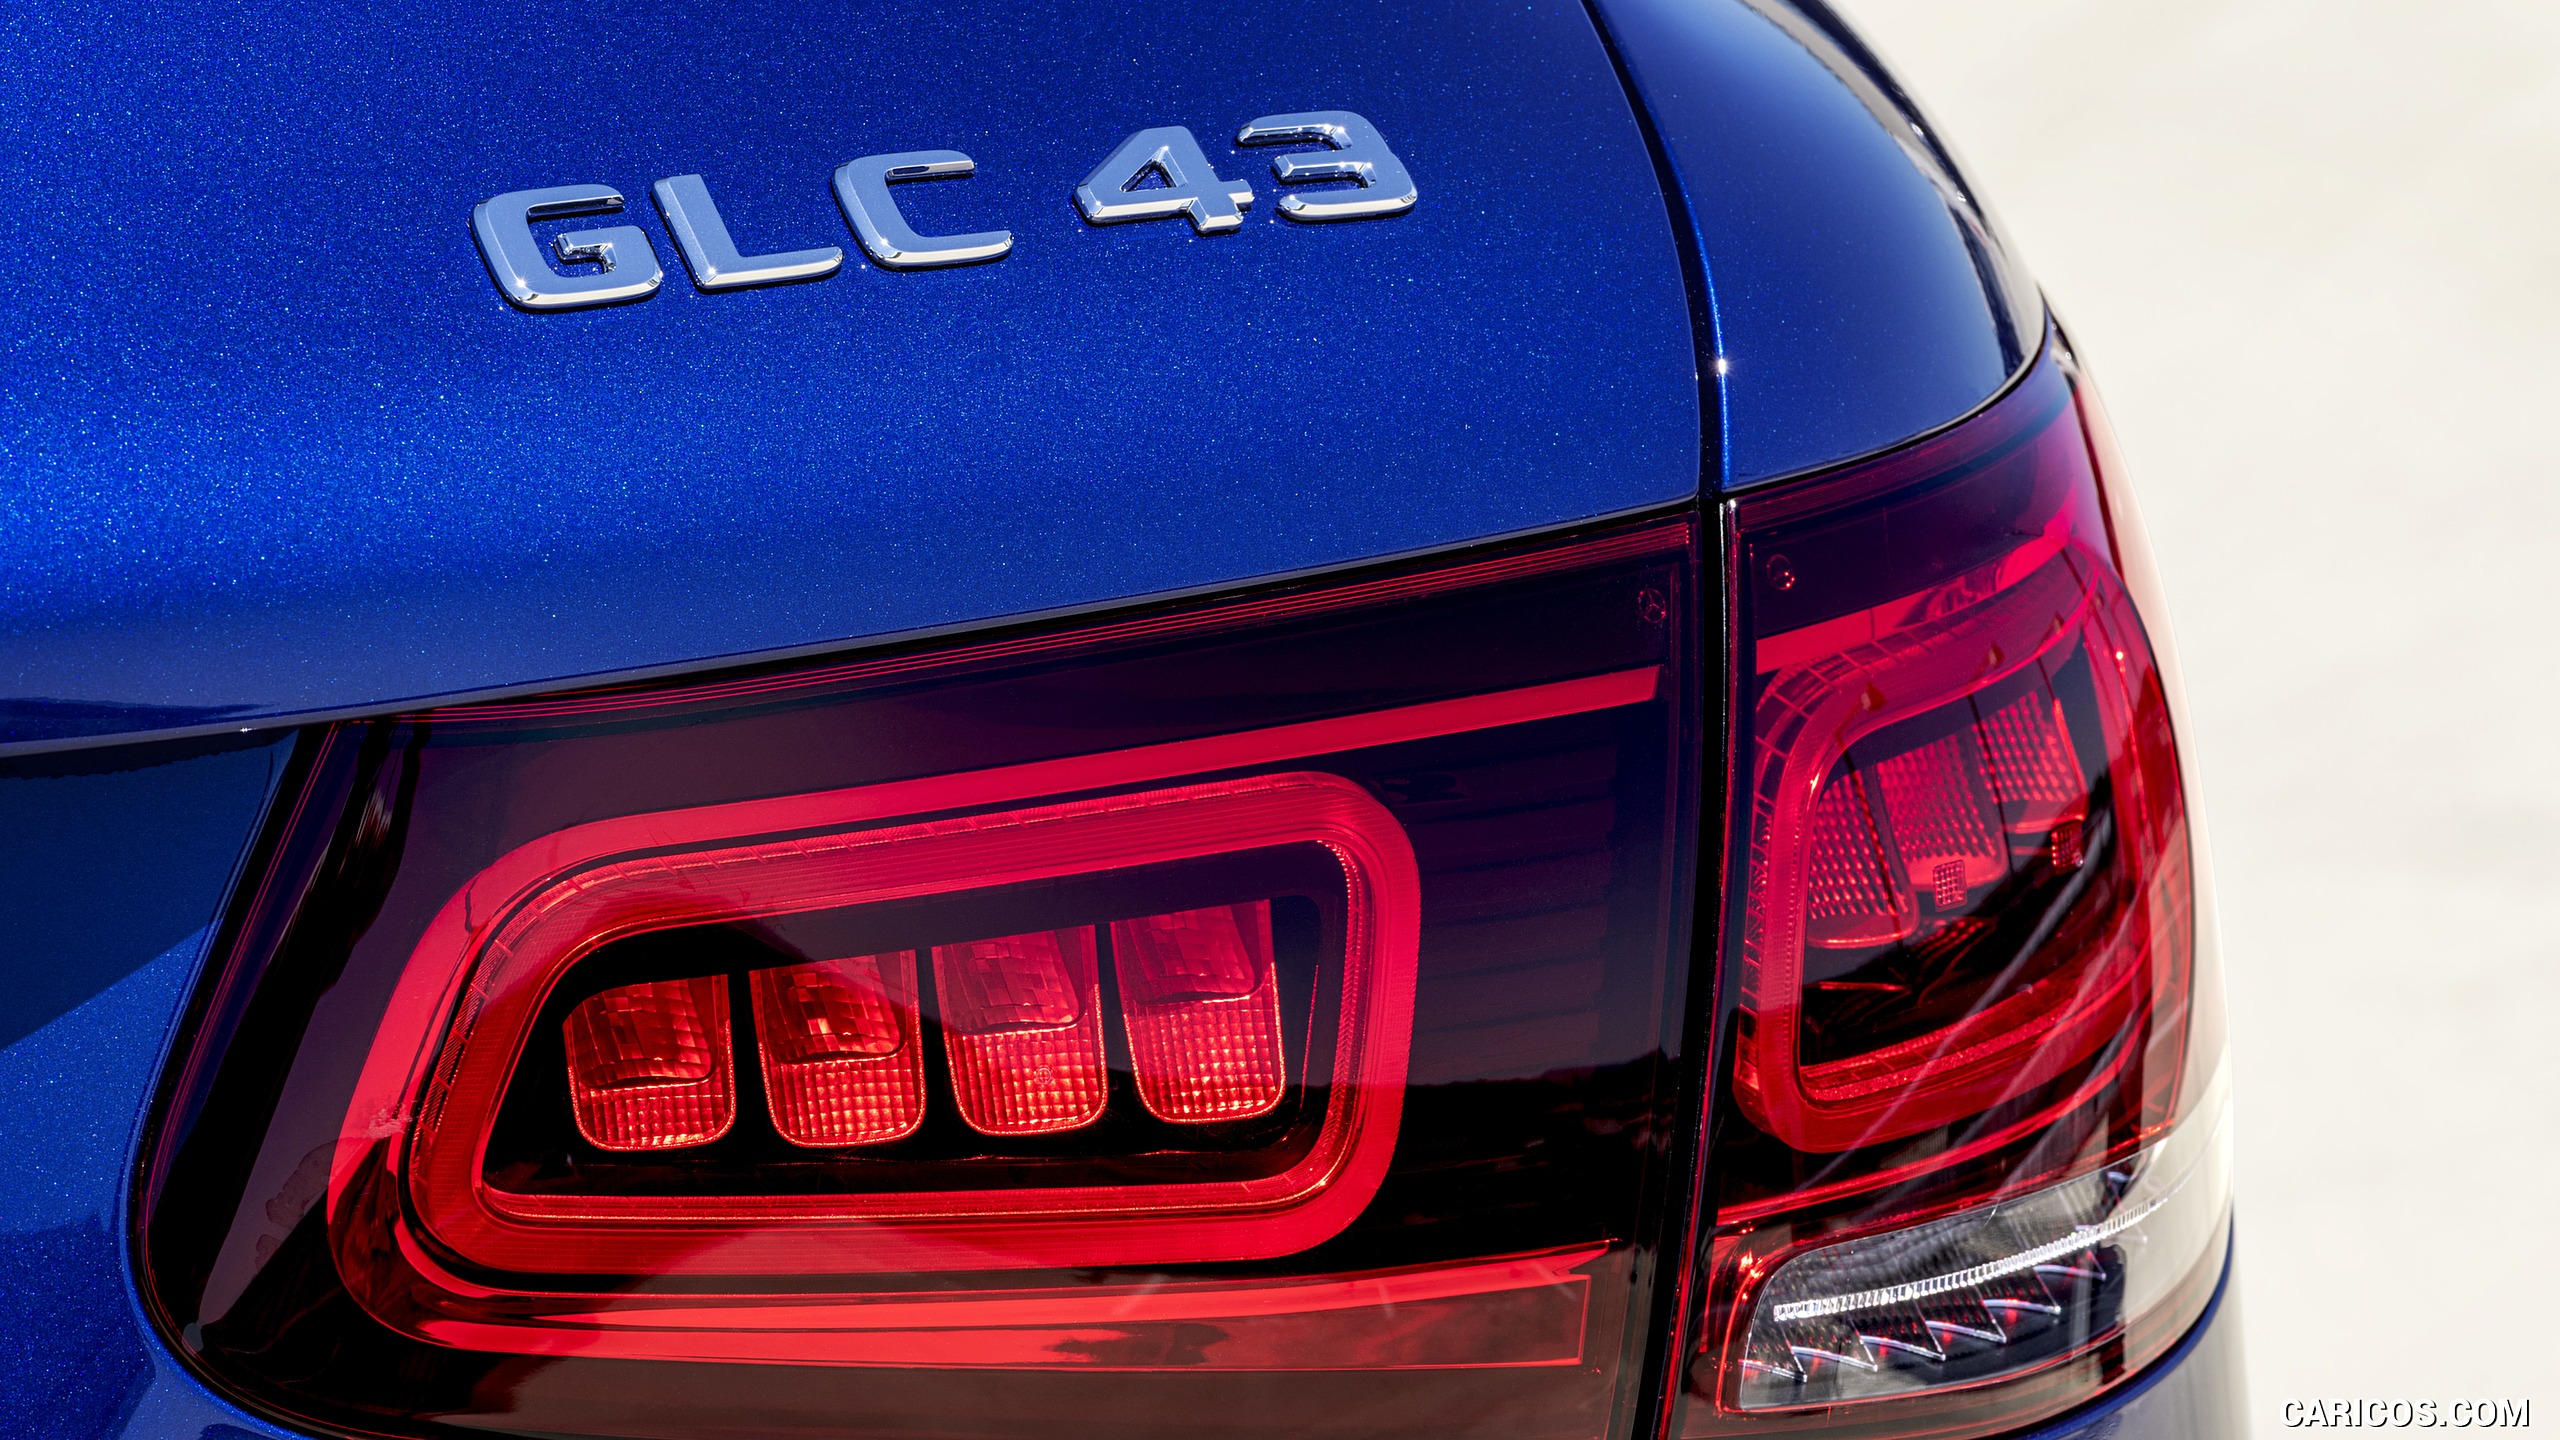 2020 Mercedes-AMG GLC 43 4MATIC - Tail Light, #13 of 86